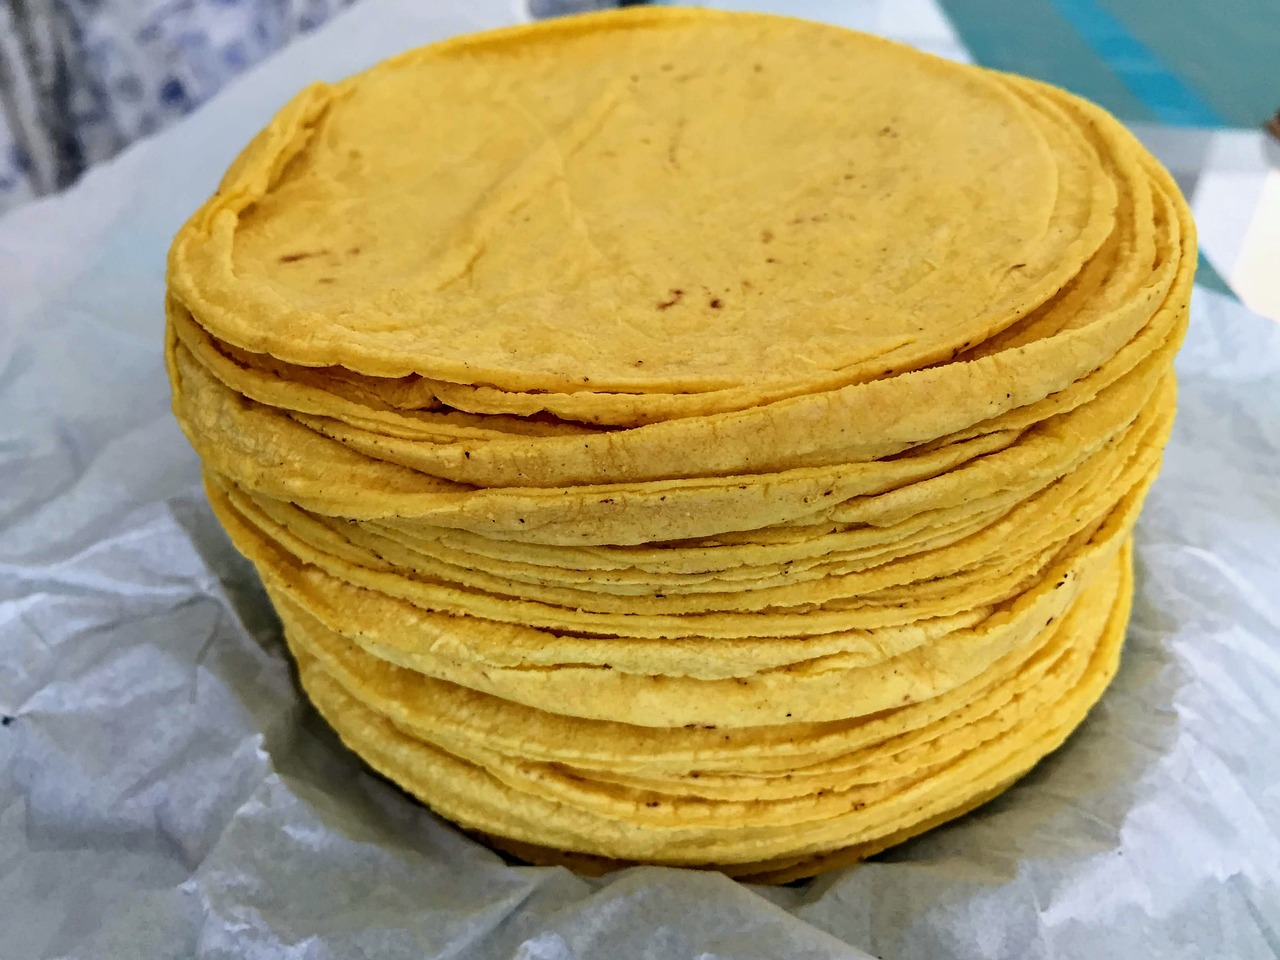 Image by NatureFriend from Pixabay Tortillas